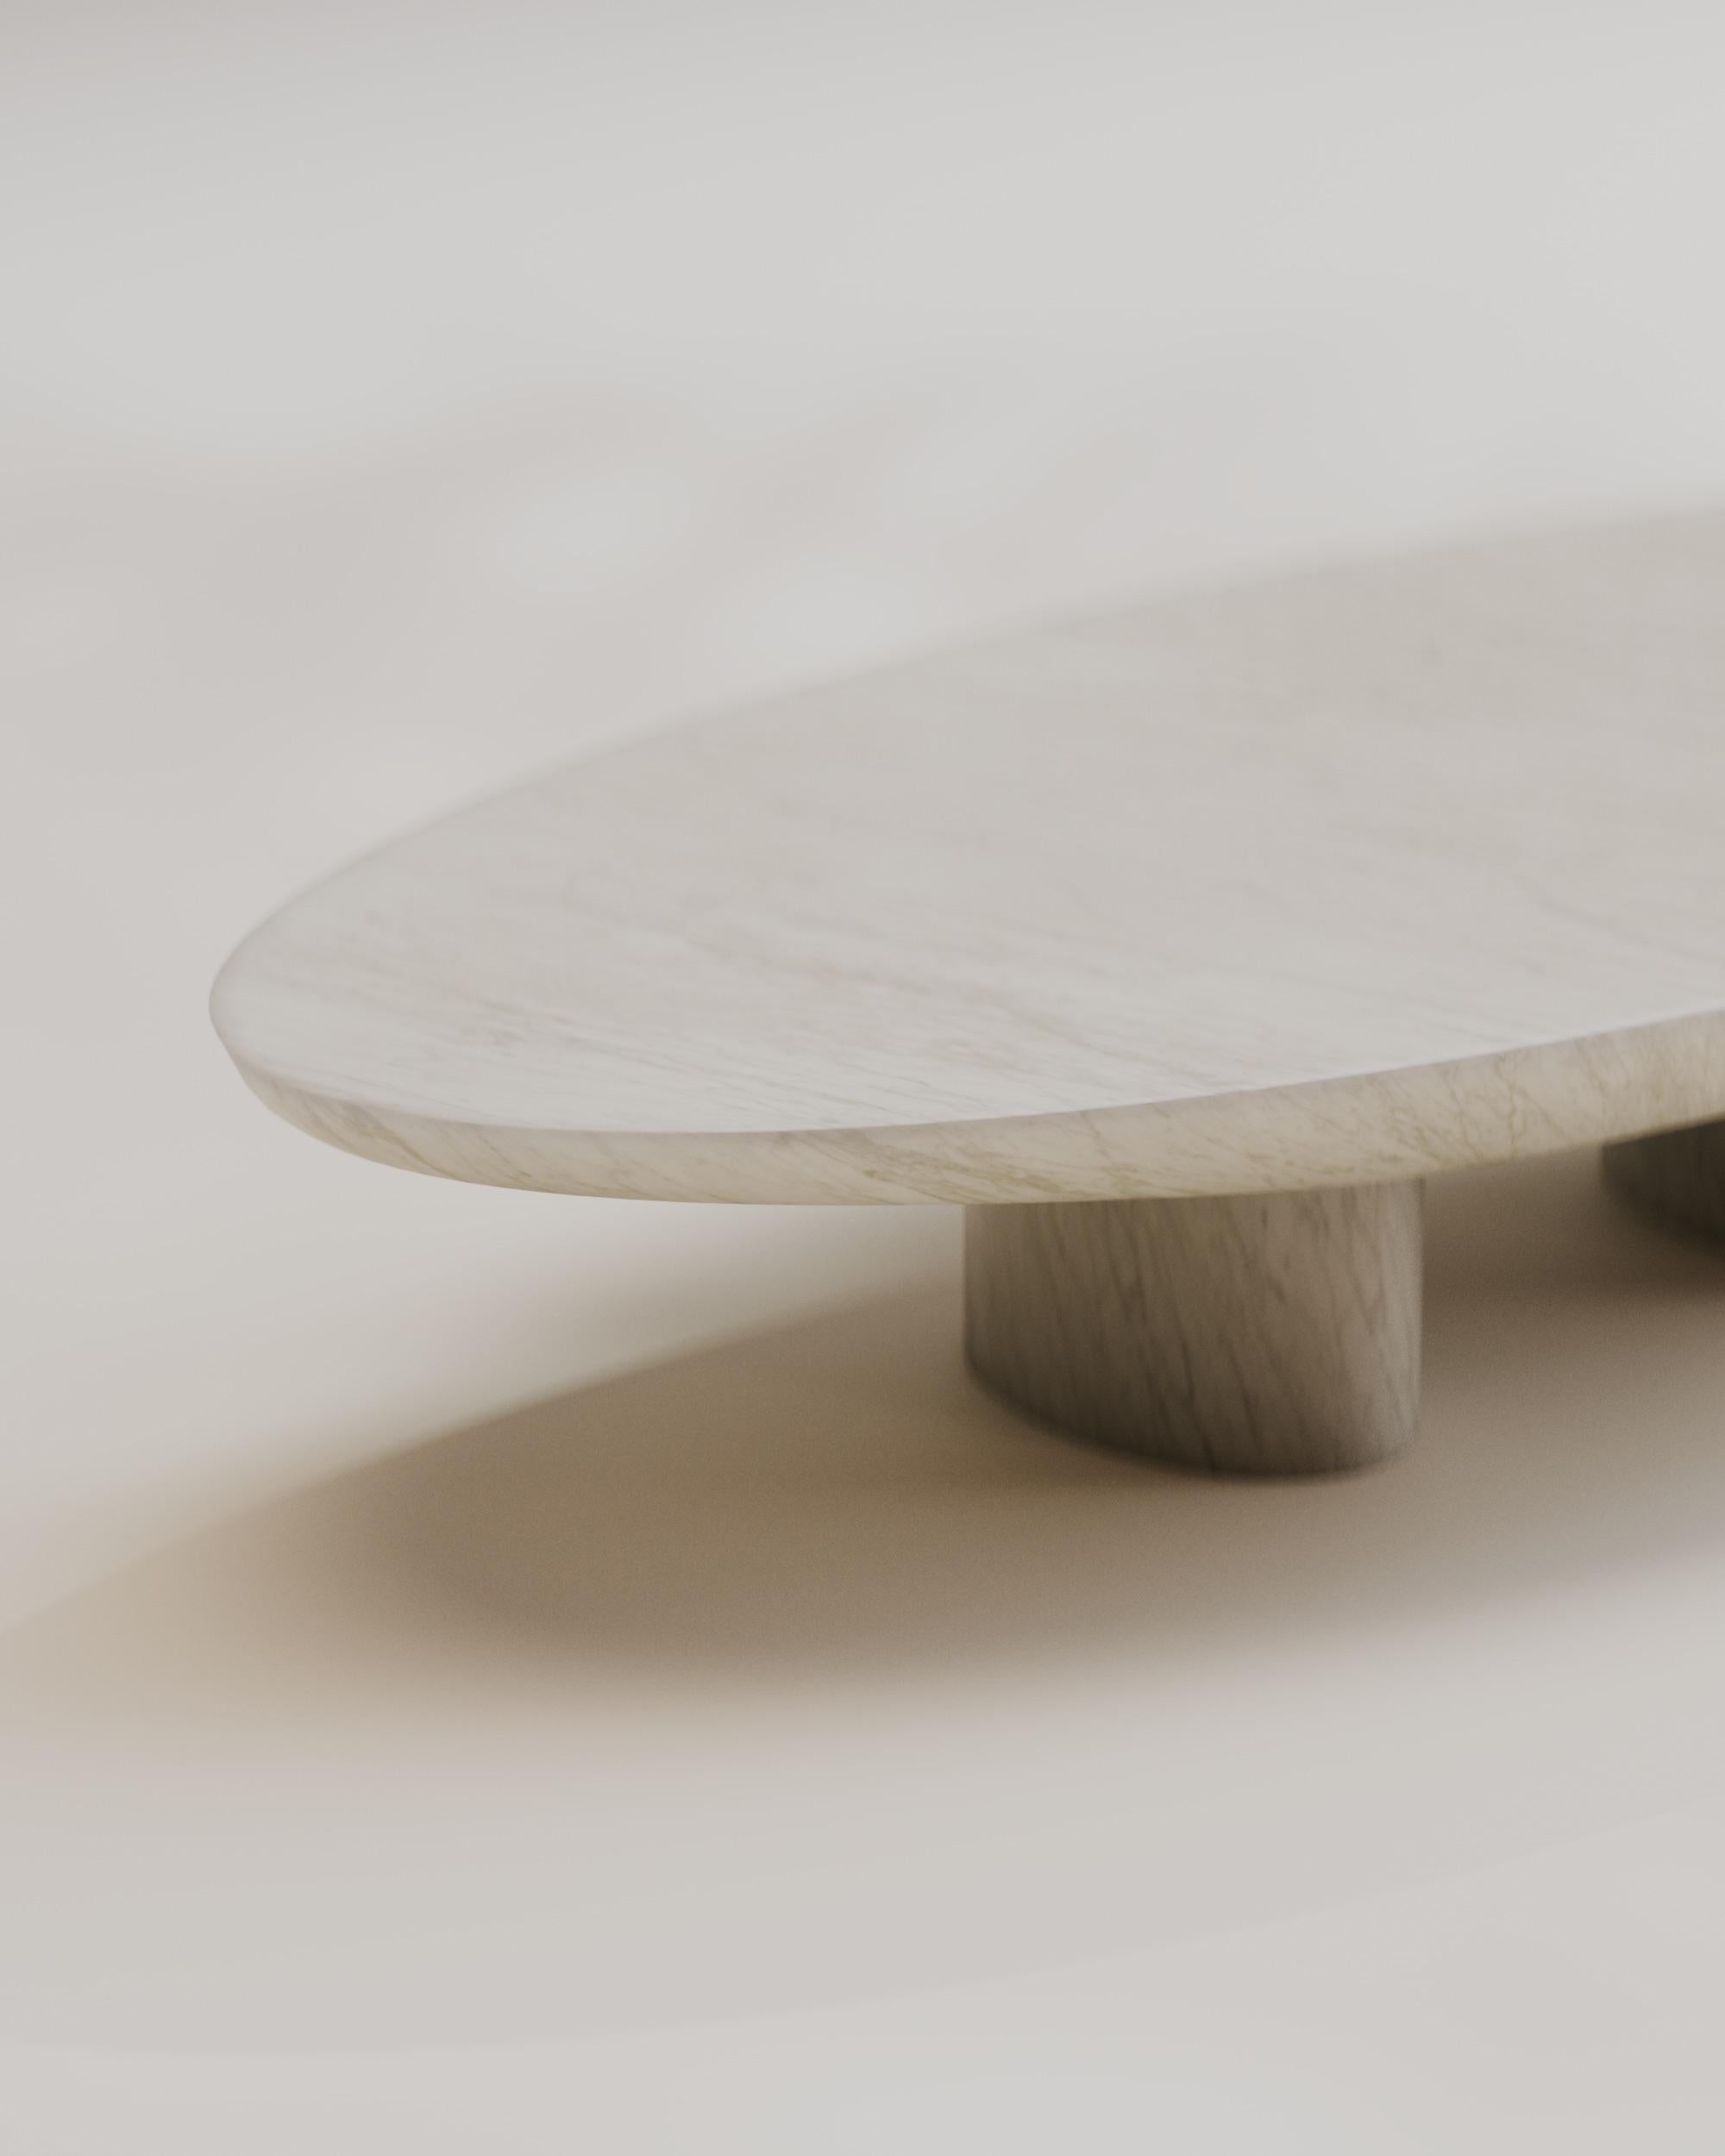 Hand-Crafted Solid White Marble Abraccio Oval Coffee Table 160 by Studio Narra For Sale